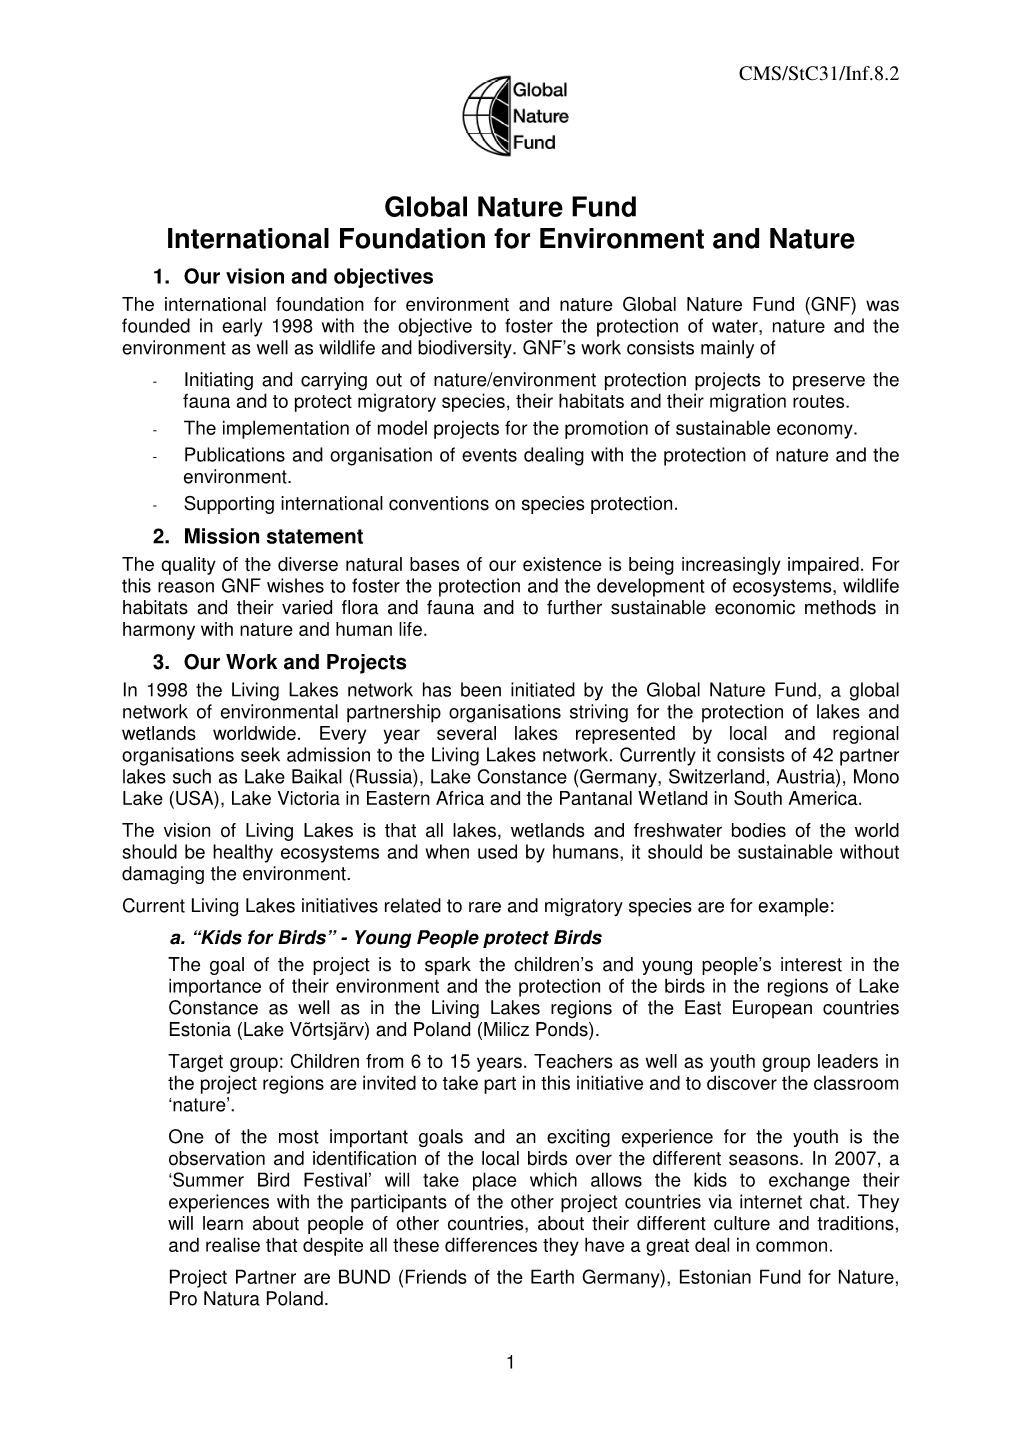 Global Nature Fund International Foundation for Environment and Nature 1